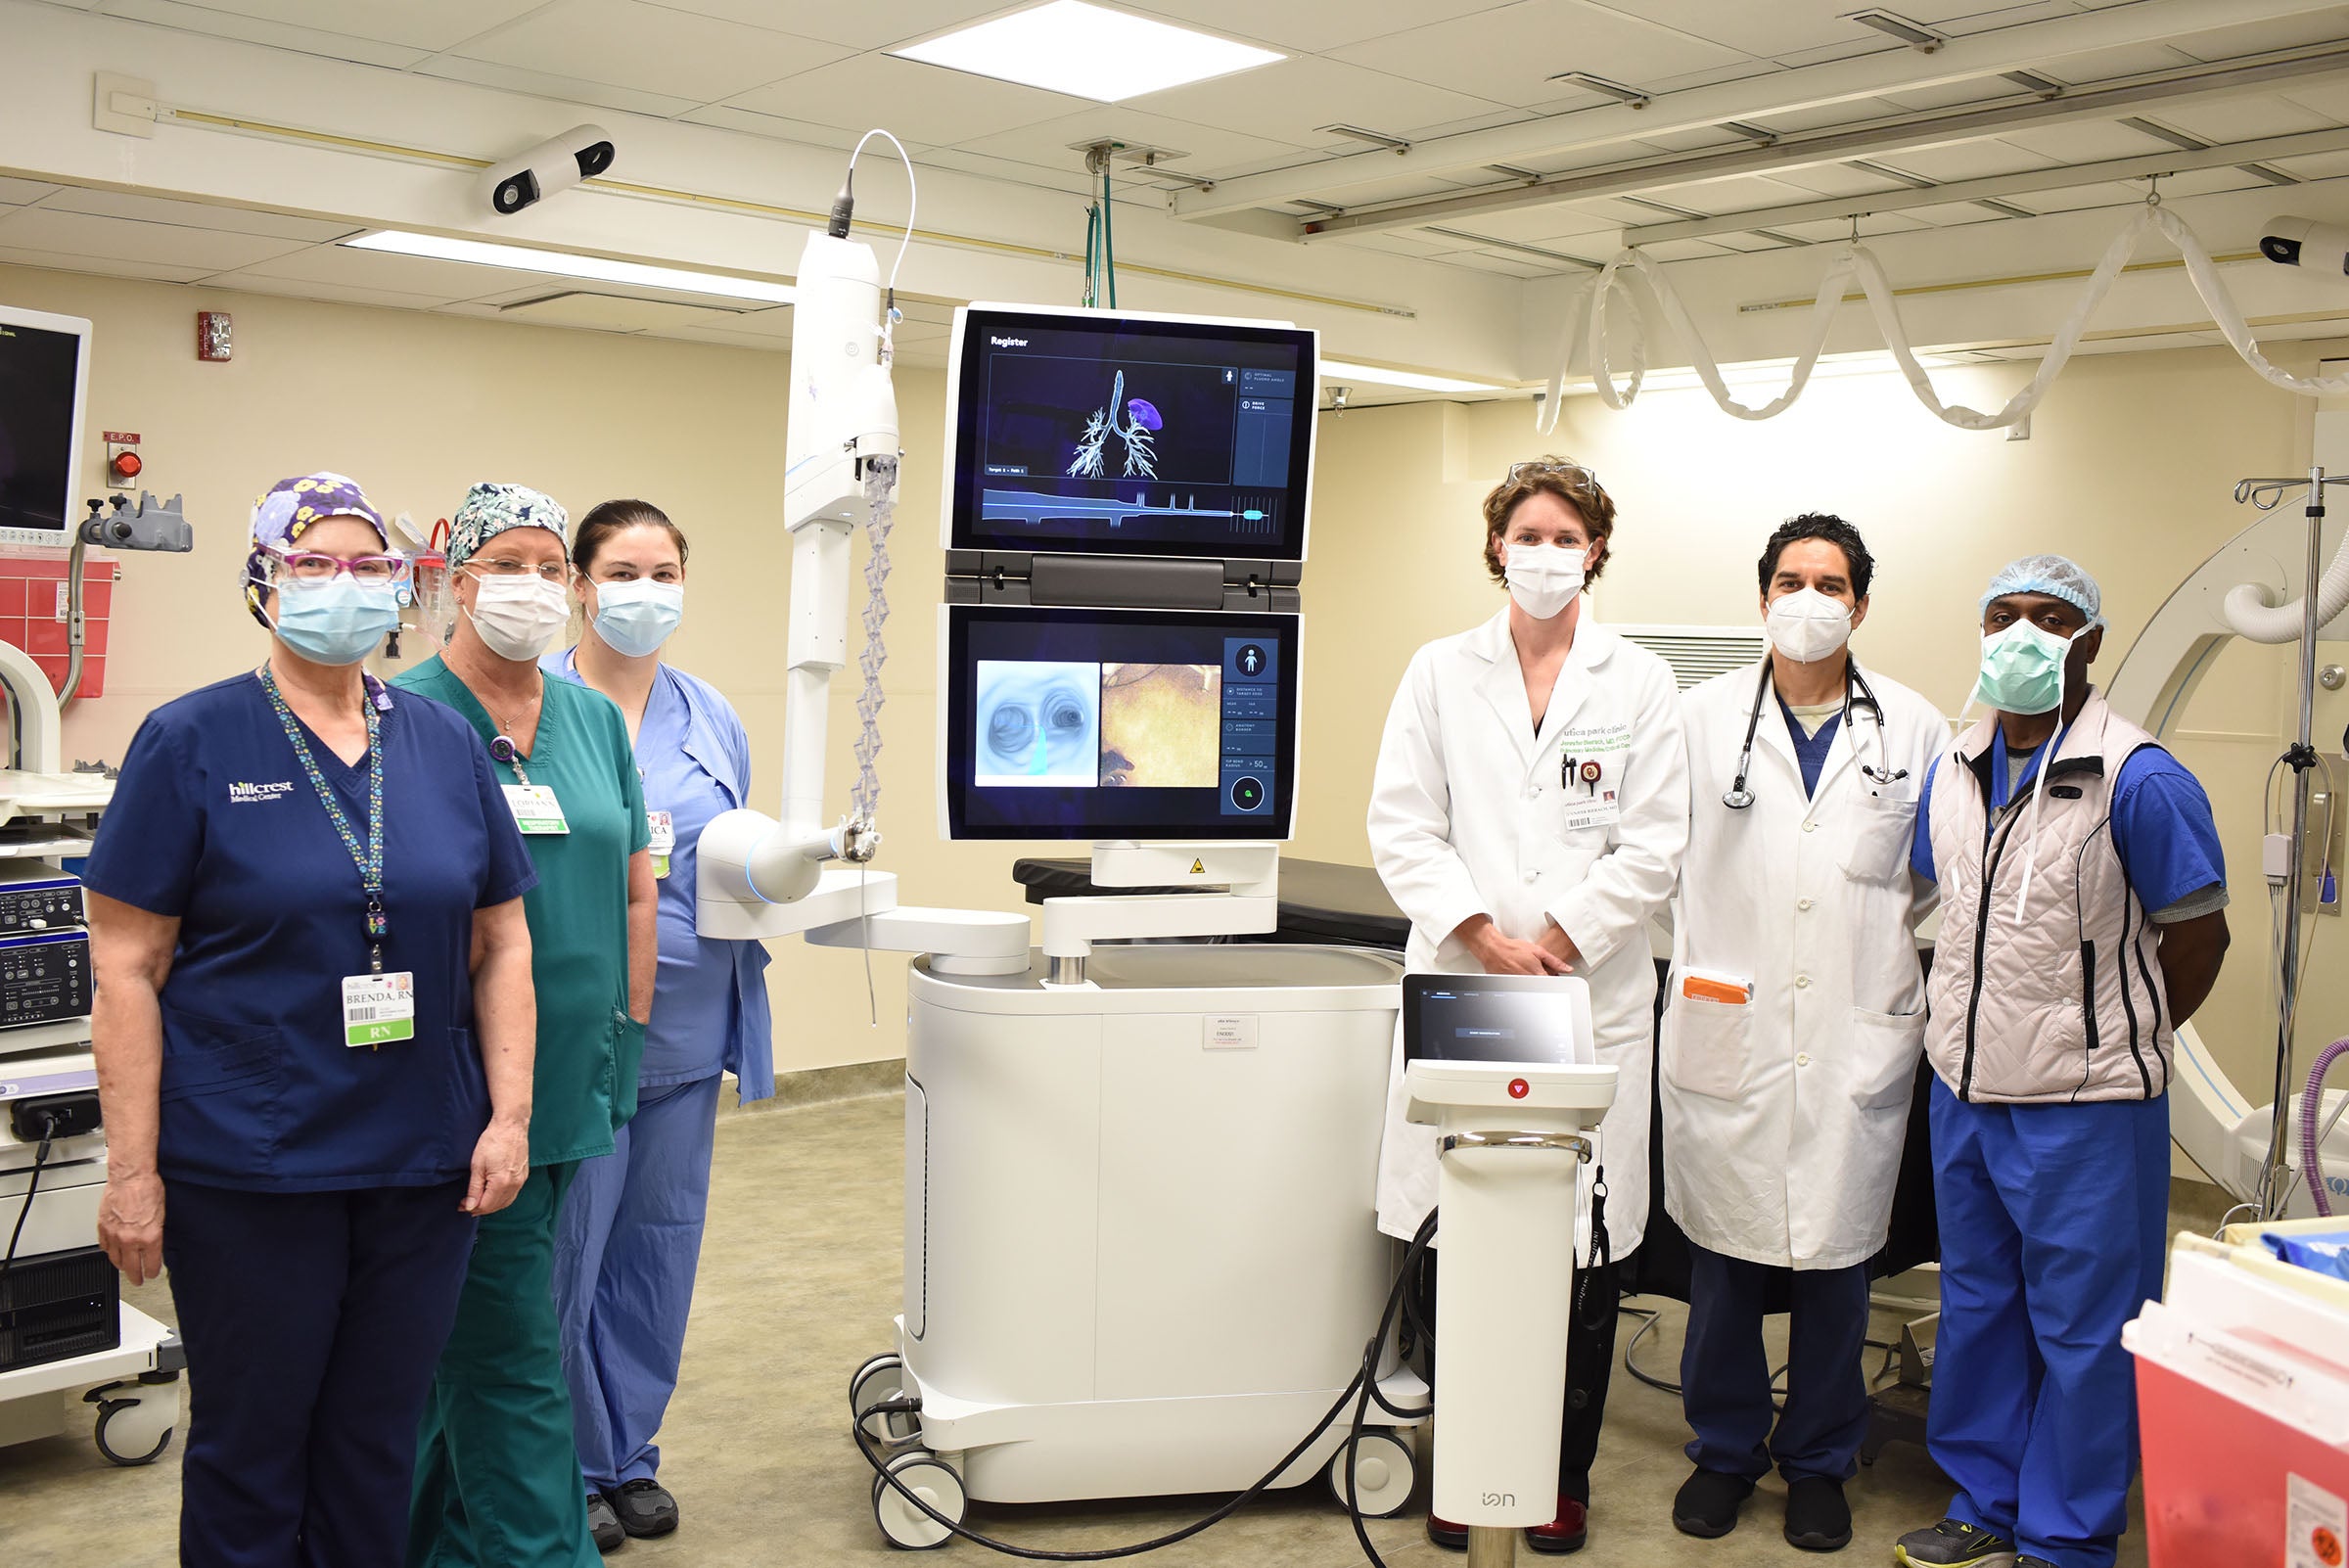 Jennifer Bierach, M.D. (third from right); Ajay Bedekar, M.D. (second from right); along with their team, performed the first Ion lung biopsy procedure in northeast Oklahoma in June 2021.